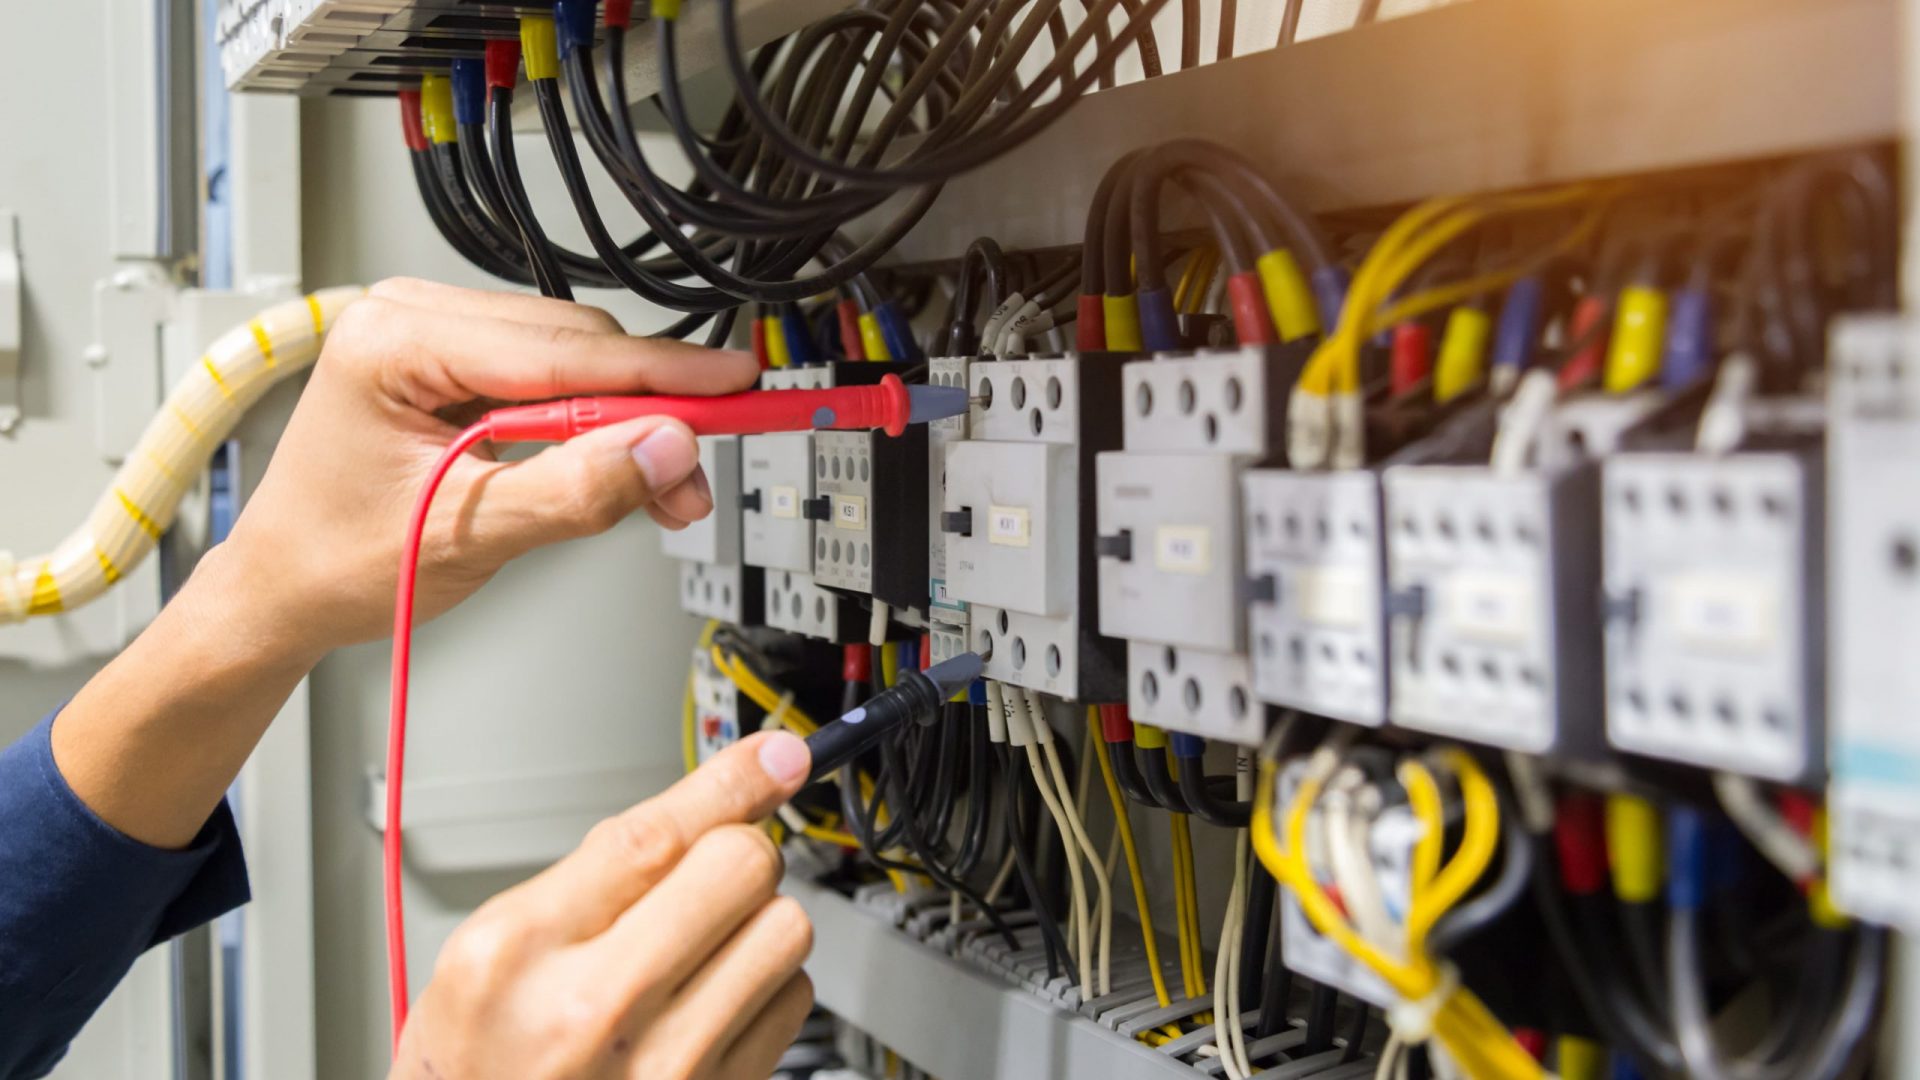 Learn the Basics of Home Electrical Wiring CoyneCollege scaled 1 Course